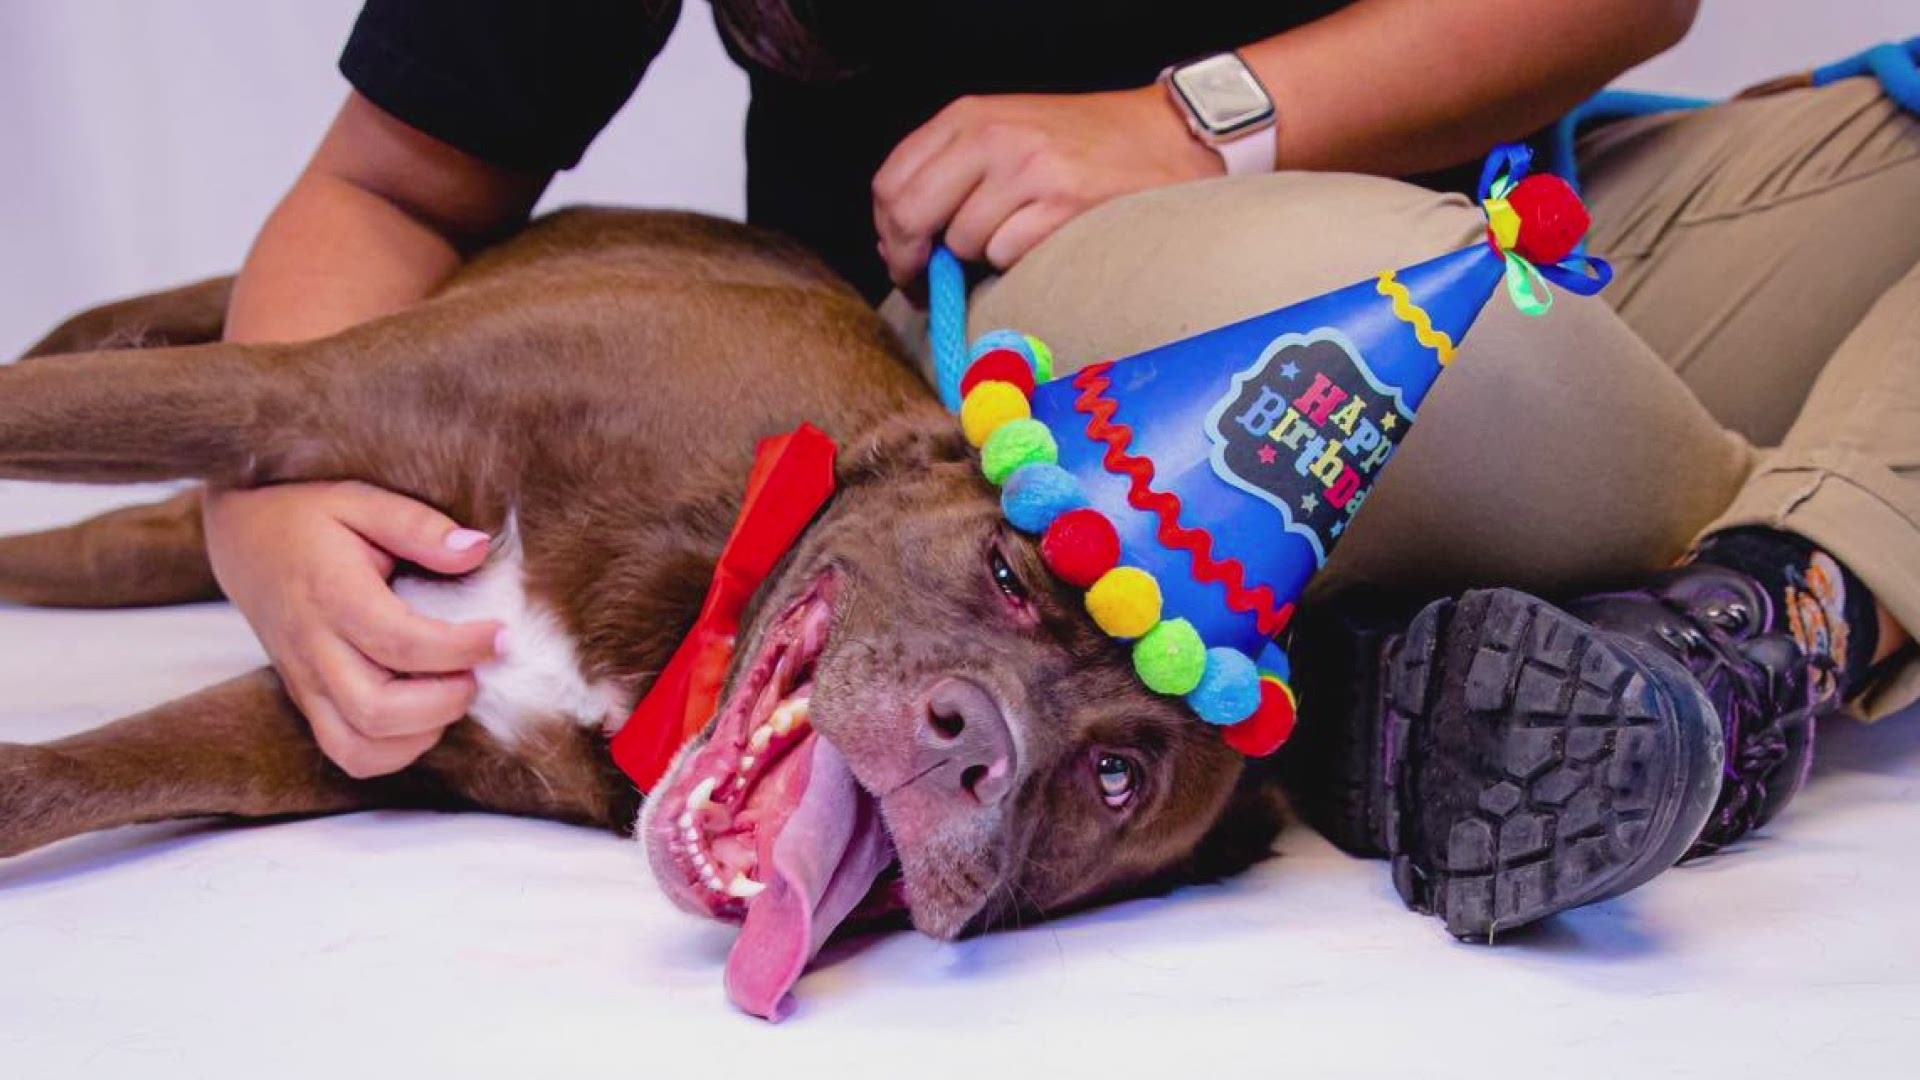 Shelter staff make the best of the situation by throwing the 2-year-old a party.